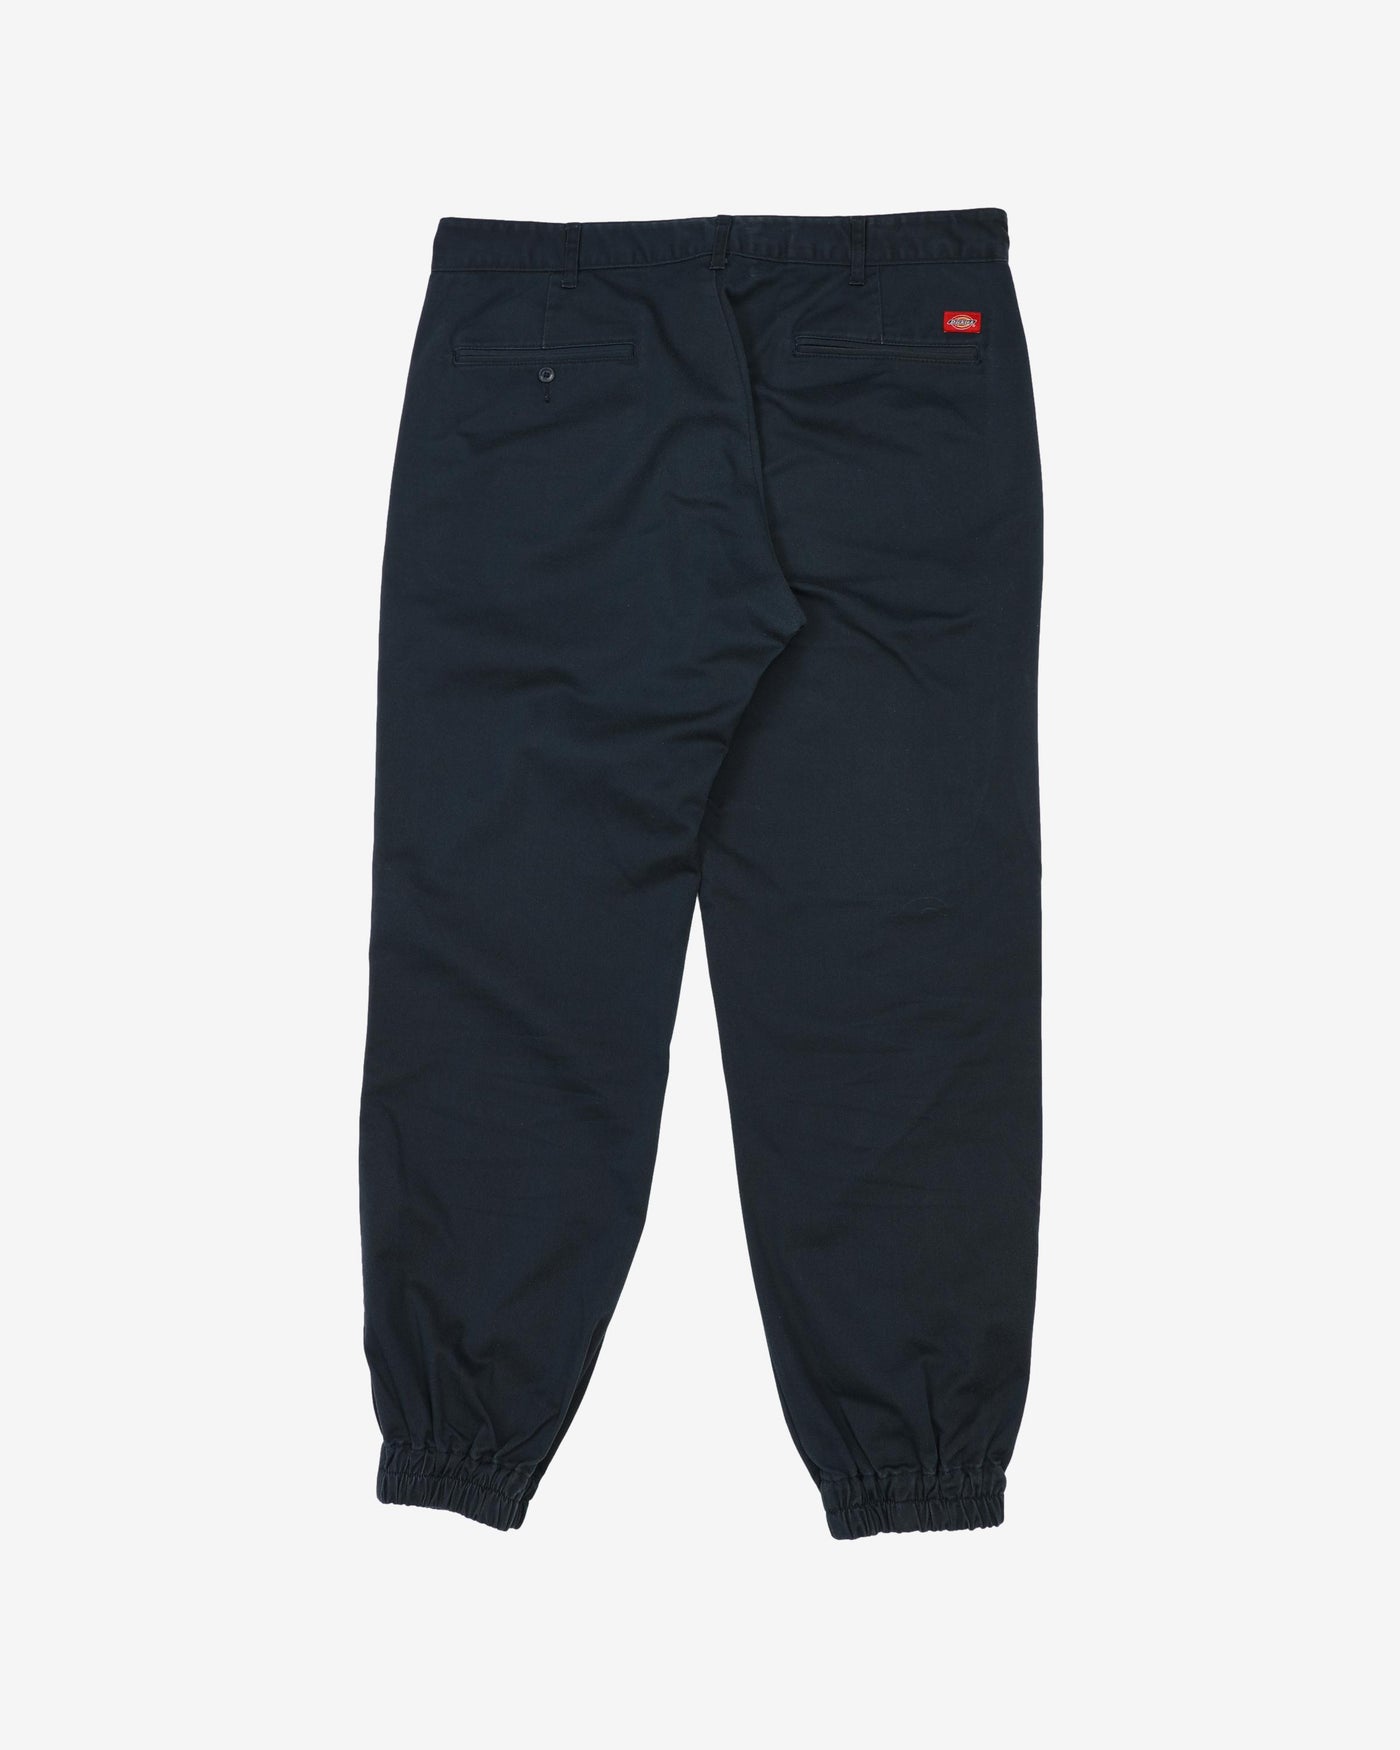 Dickies Navy Cuffed Pants / Trousers - W36 L29